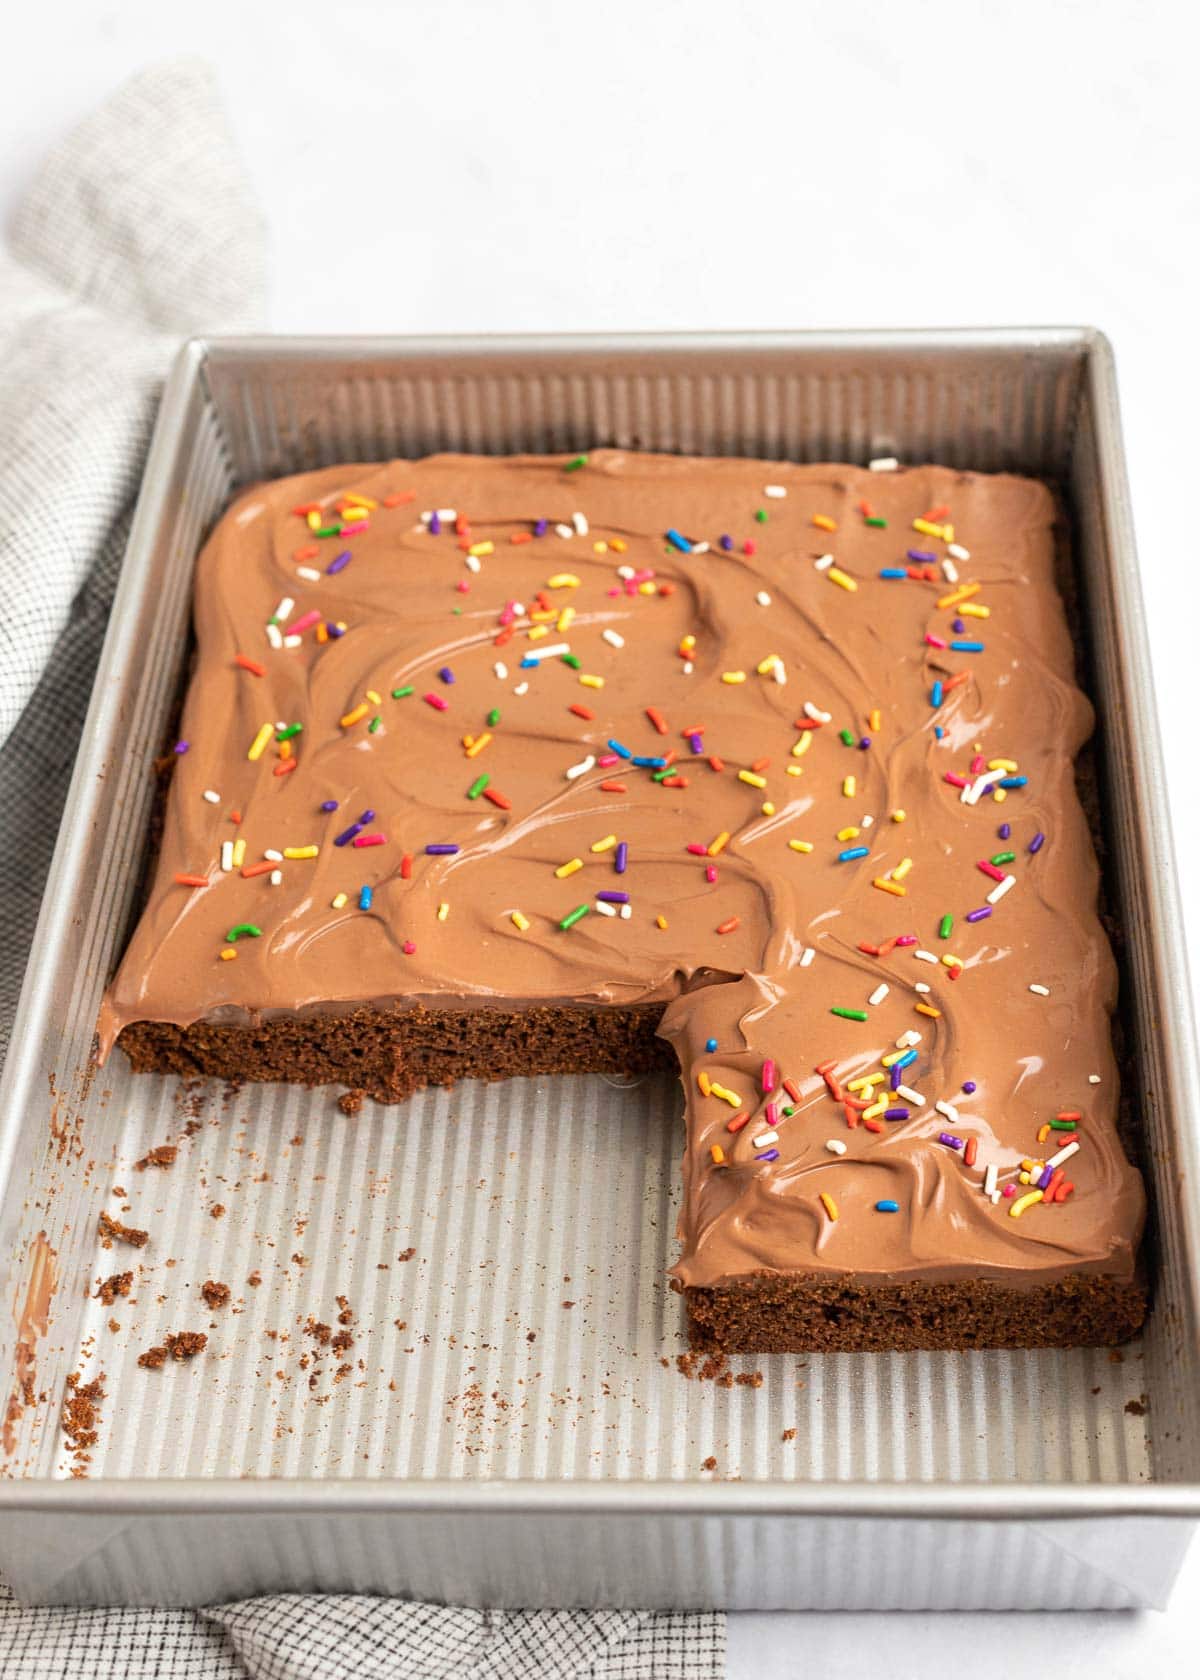 Chocolate cake in a cake pan, covered in sprinkles, with a few pieces cut out